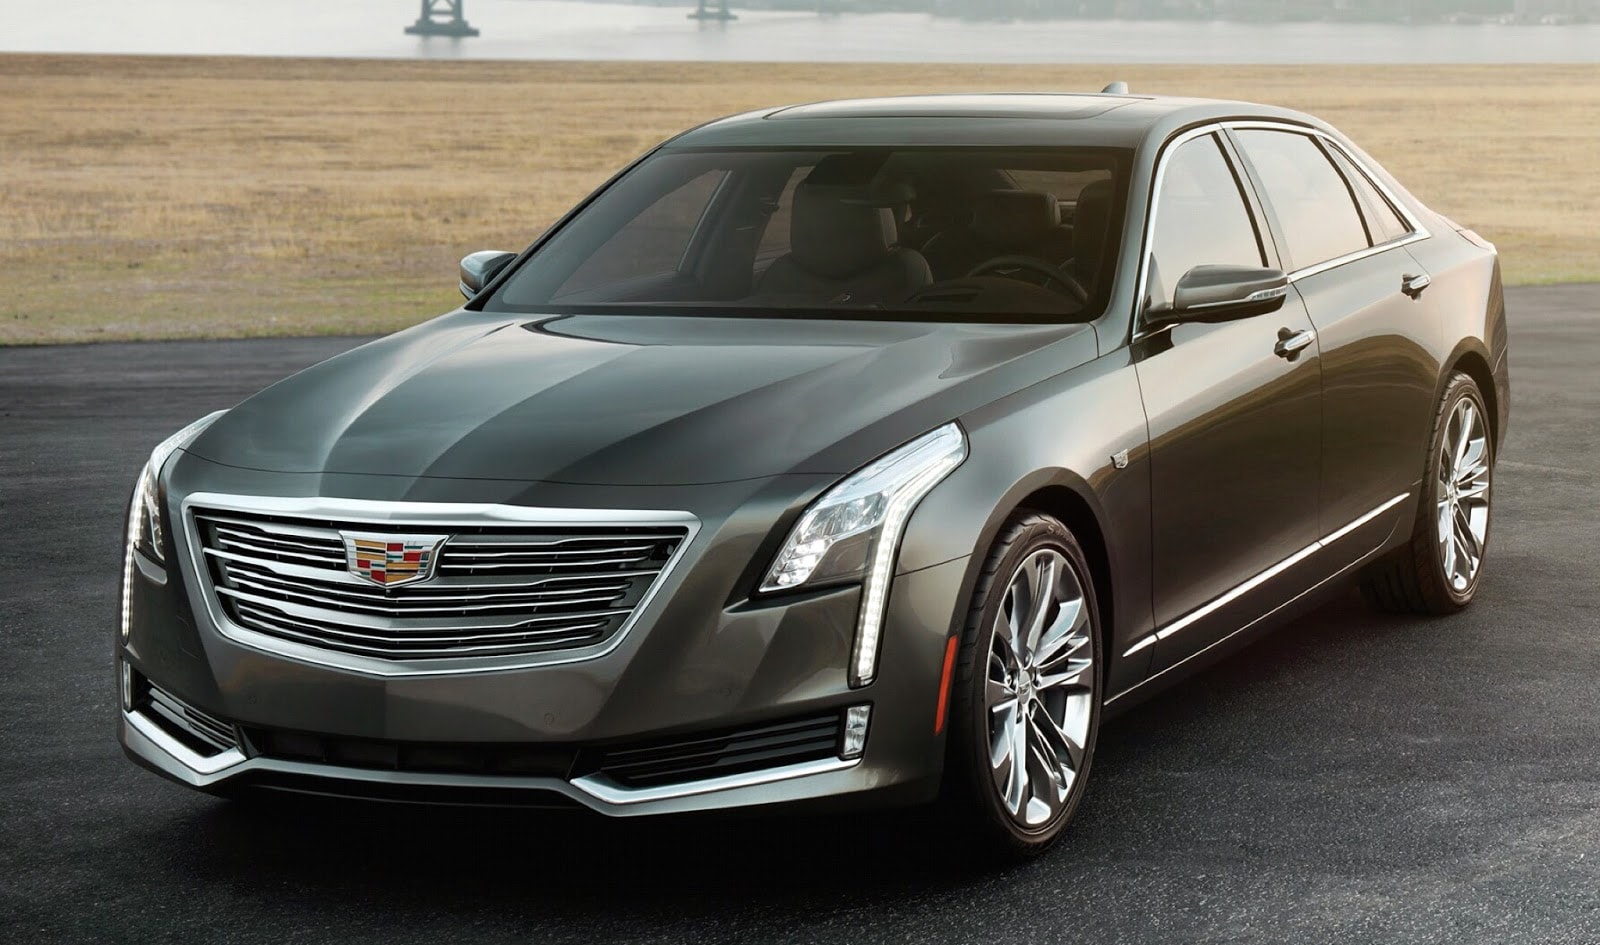 2016 Cadillac CT6 Leaked Ahead of NYIAS Debut - autoevolution